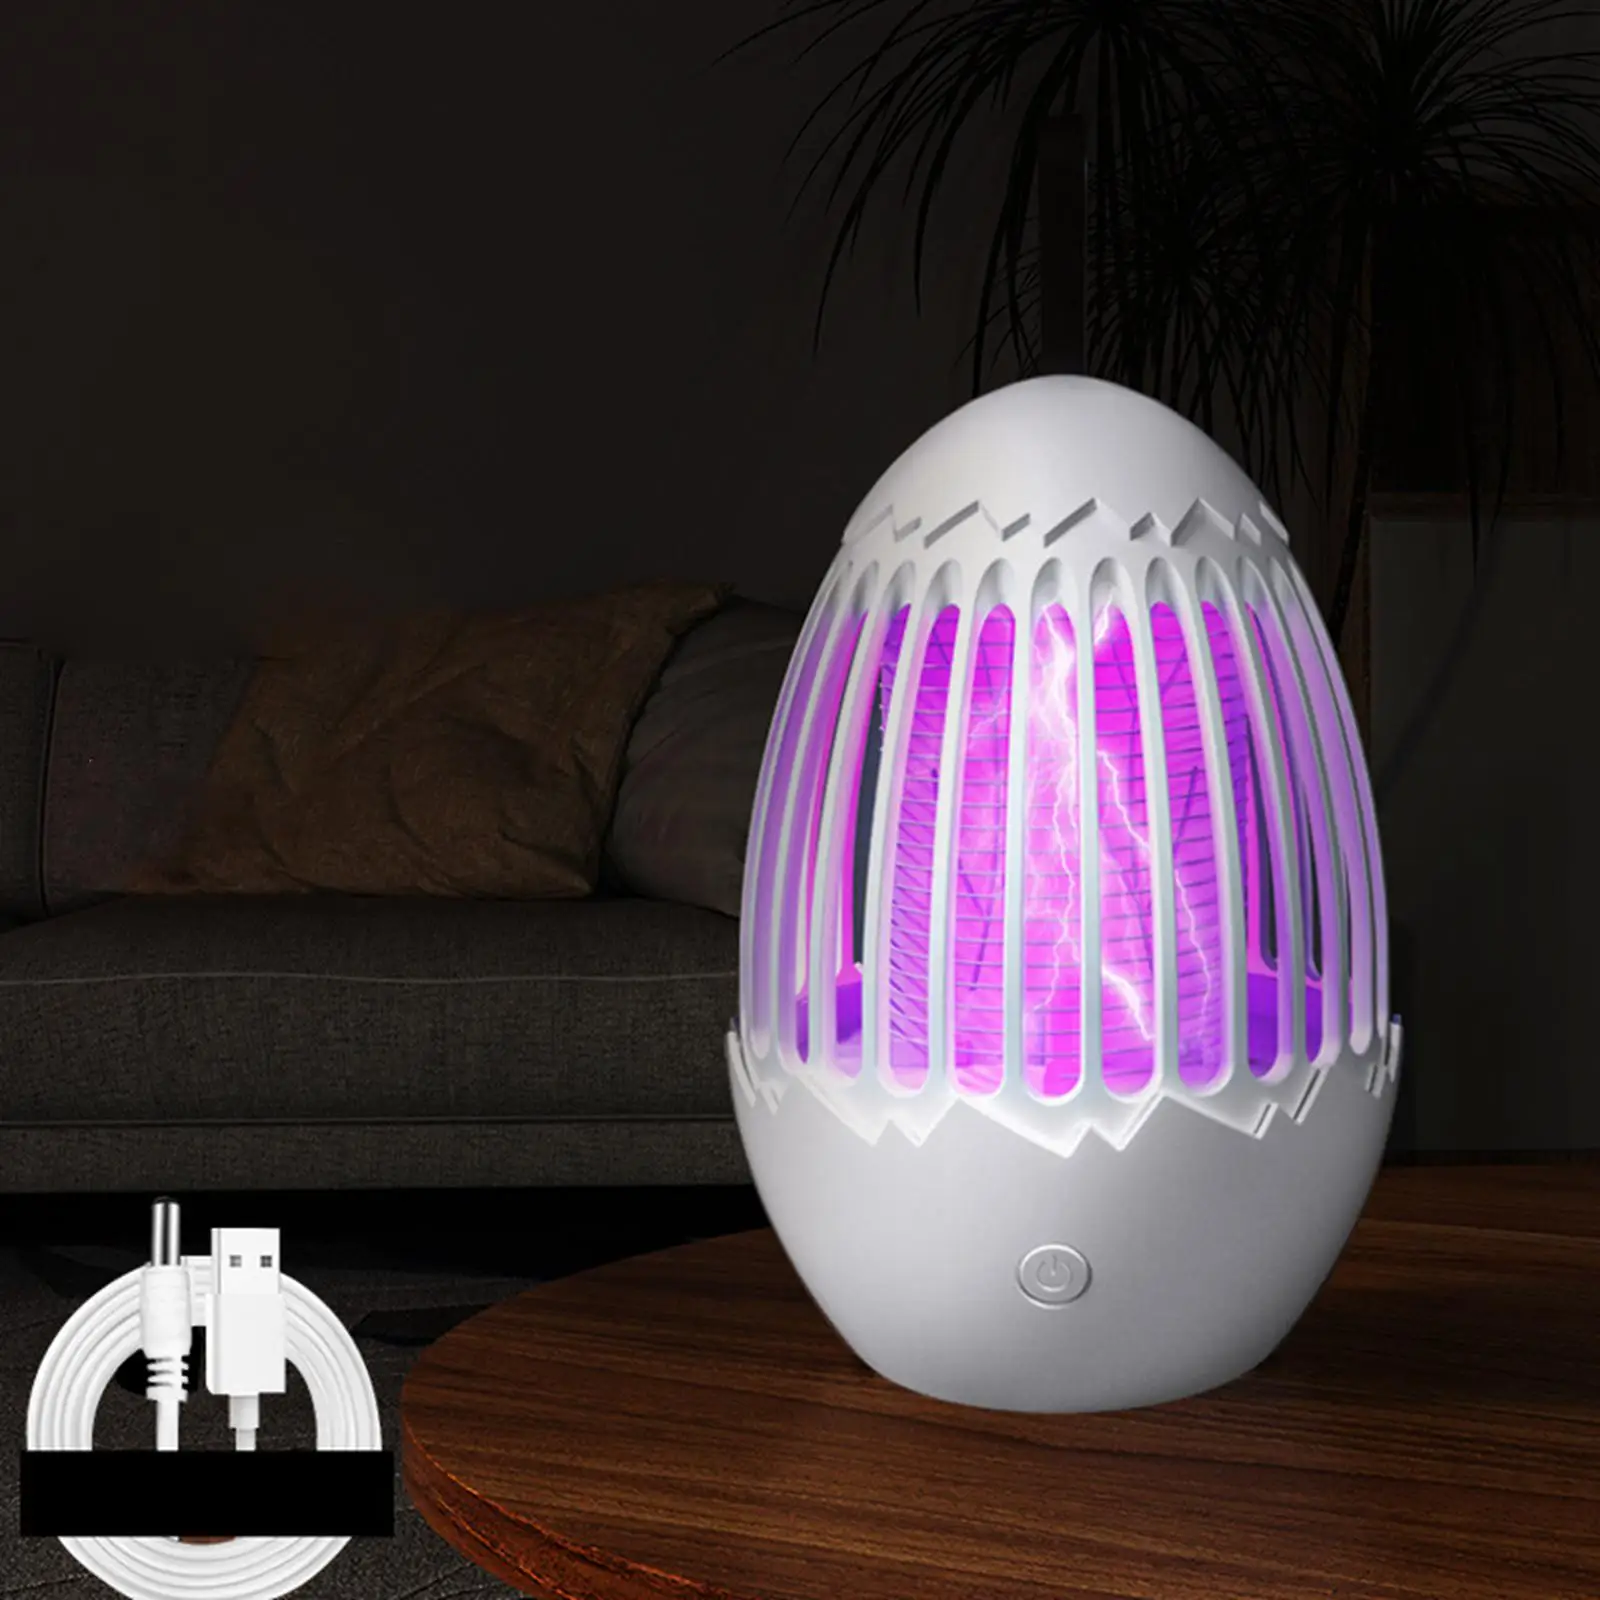 Mosquito Killer Lamp Efficient Egg Shape 5W Energy Saving Fly Repel Anti Mosquito Light for Bedroom Patio Camping Garden Hiking